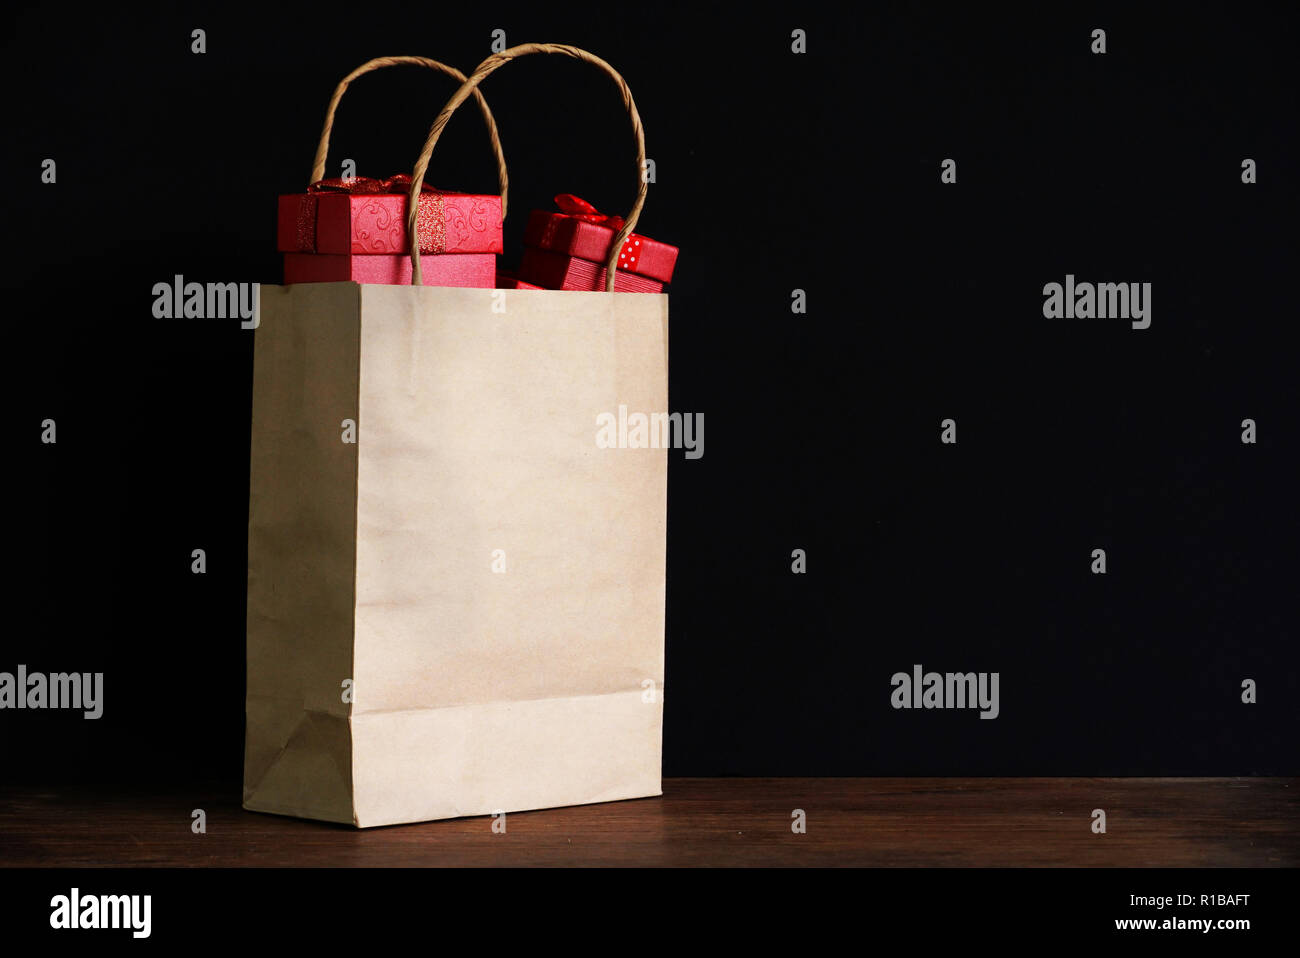 Tree red gift box in shopping bag on black background for shopping theme. Stock Photo